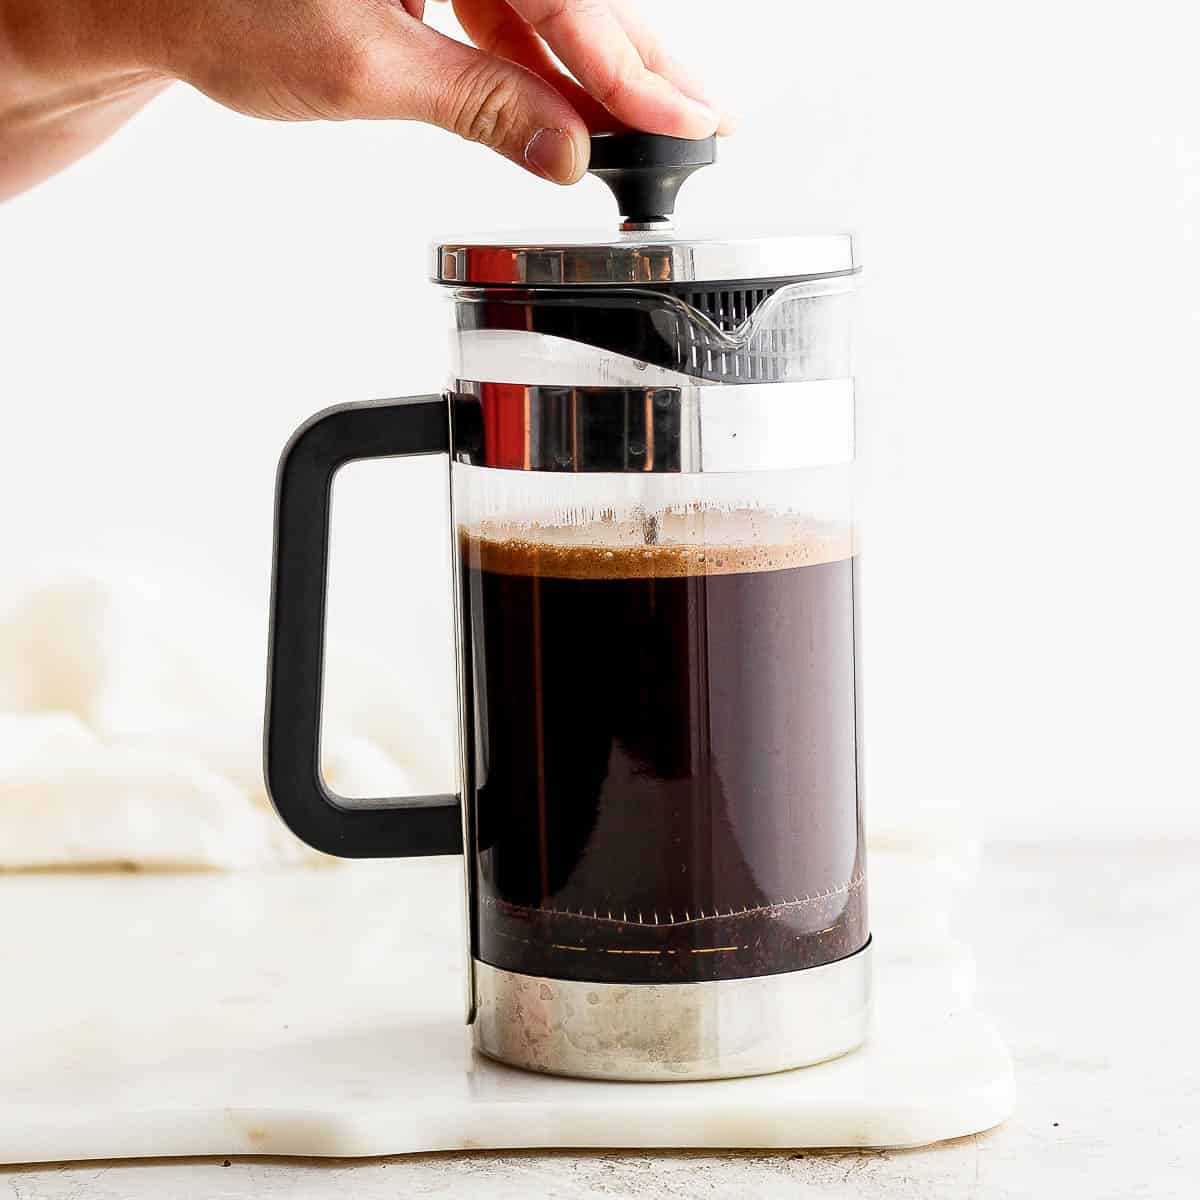 https://thewoodenskillet.com/wp-content/uploads/2022/08/how-to-use-a-french-press-coffee-maker-1.jpg